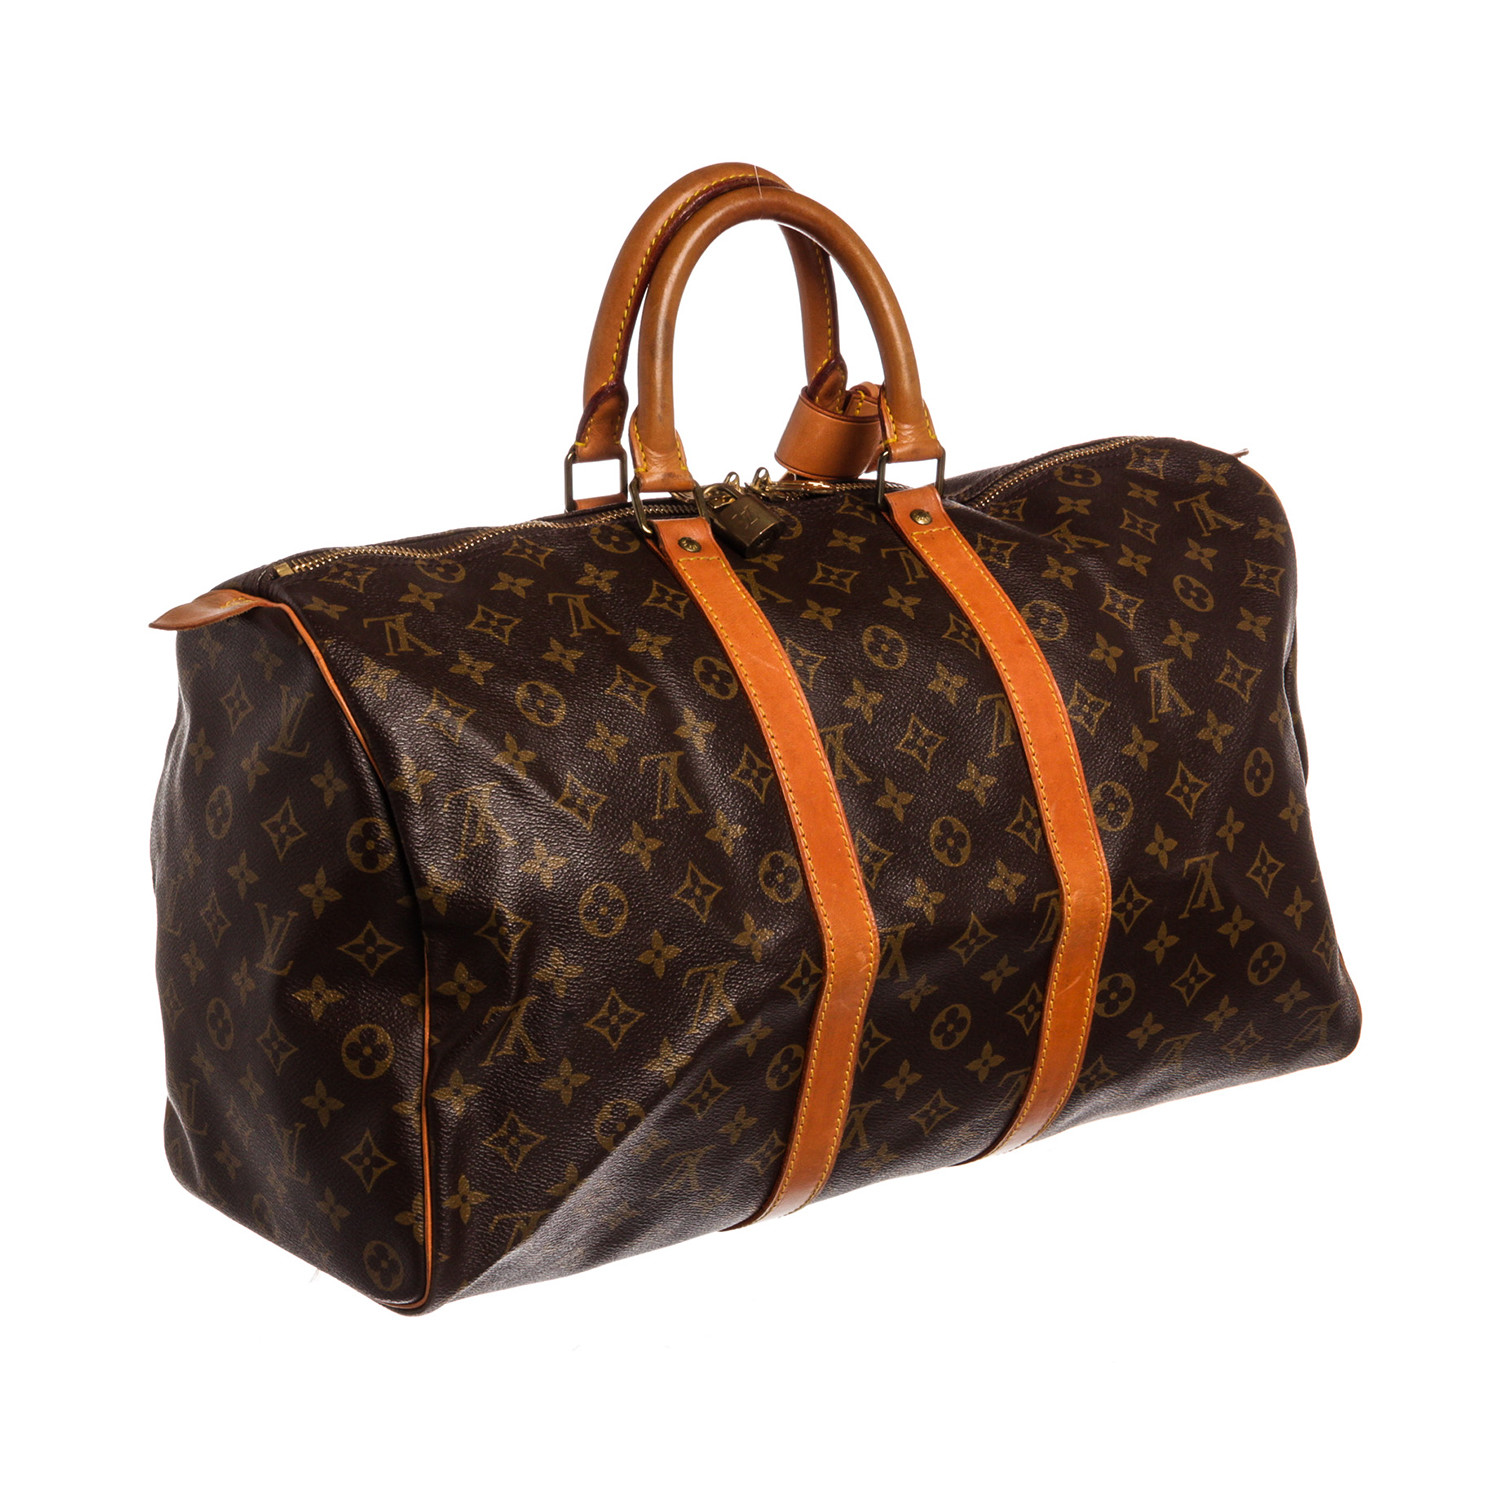 Louis Vuitton // Monogram Canvas Leather Keepall 45 cm Duffle Bag Luggage // VI8902 // Pre-Owned ...